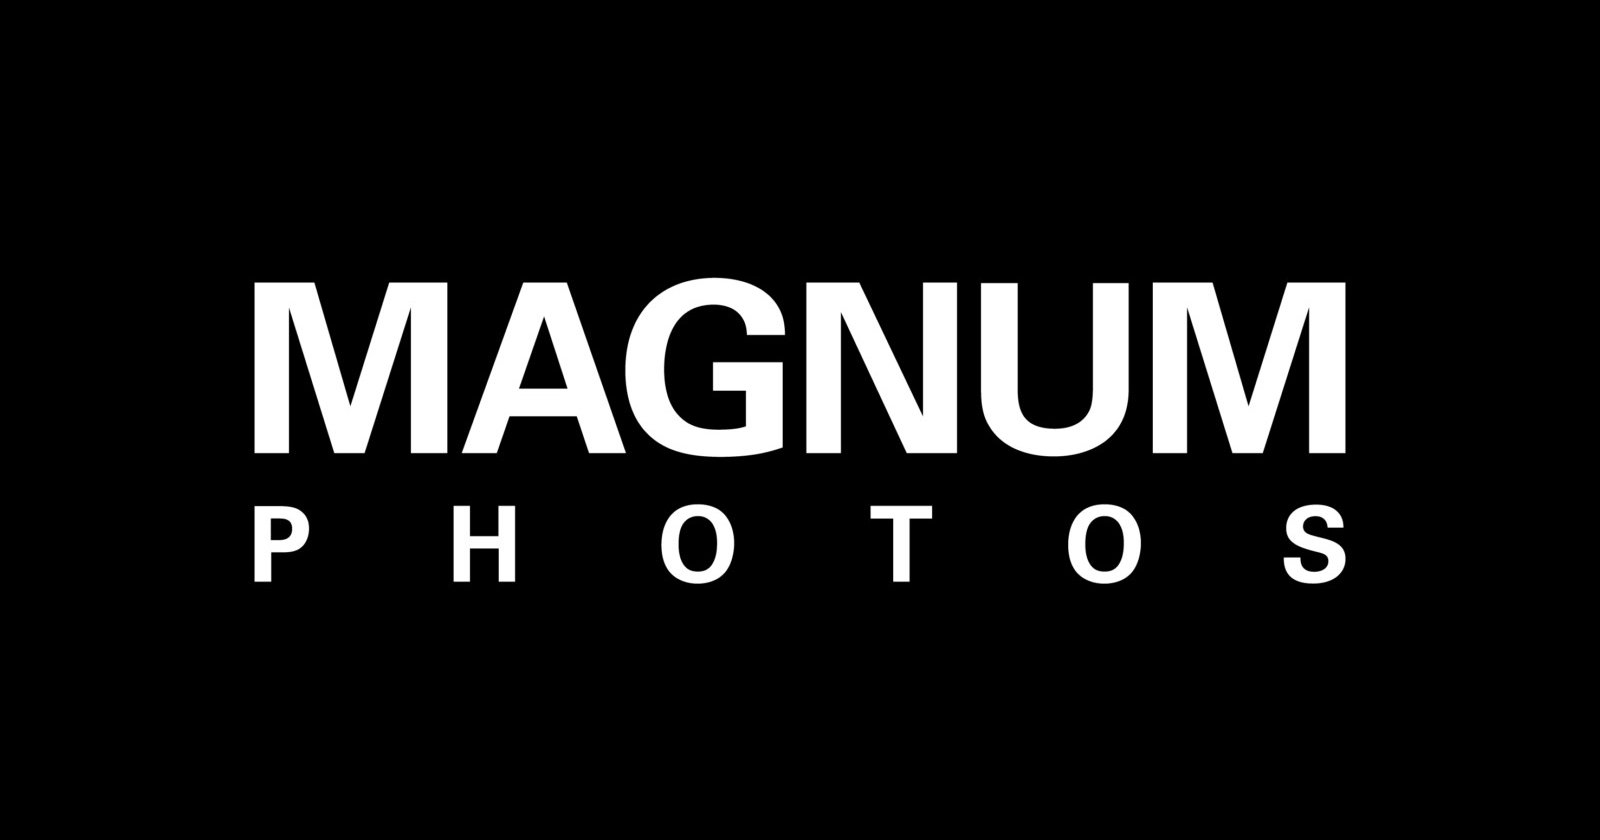 Statement Signed by 600+ Photography Professionals Demands Accountability from Magnum Photos